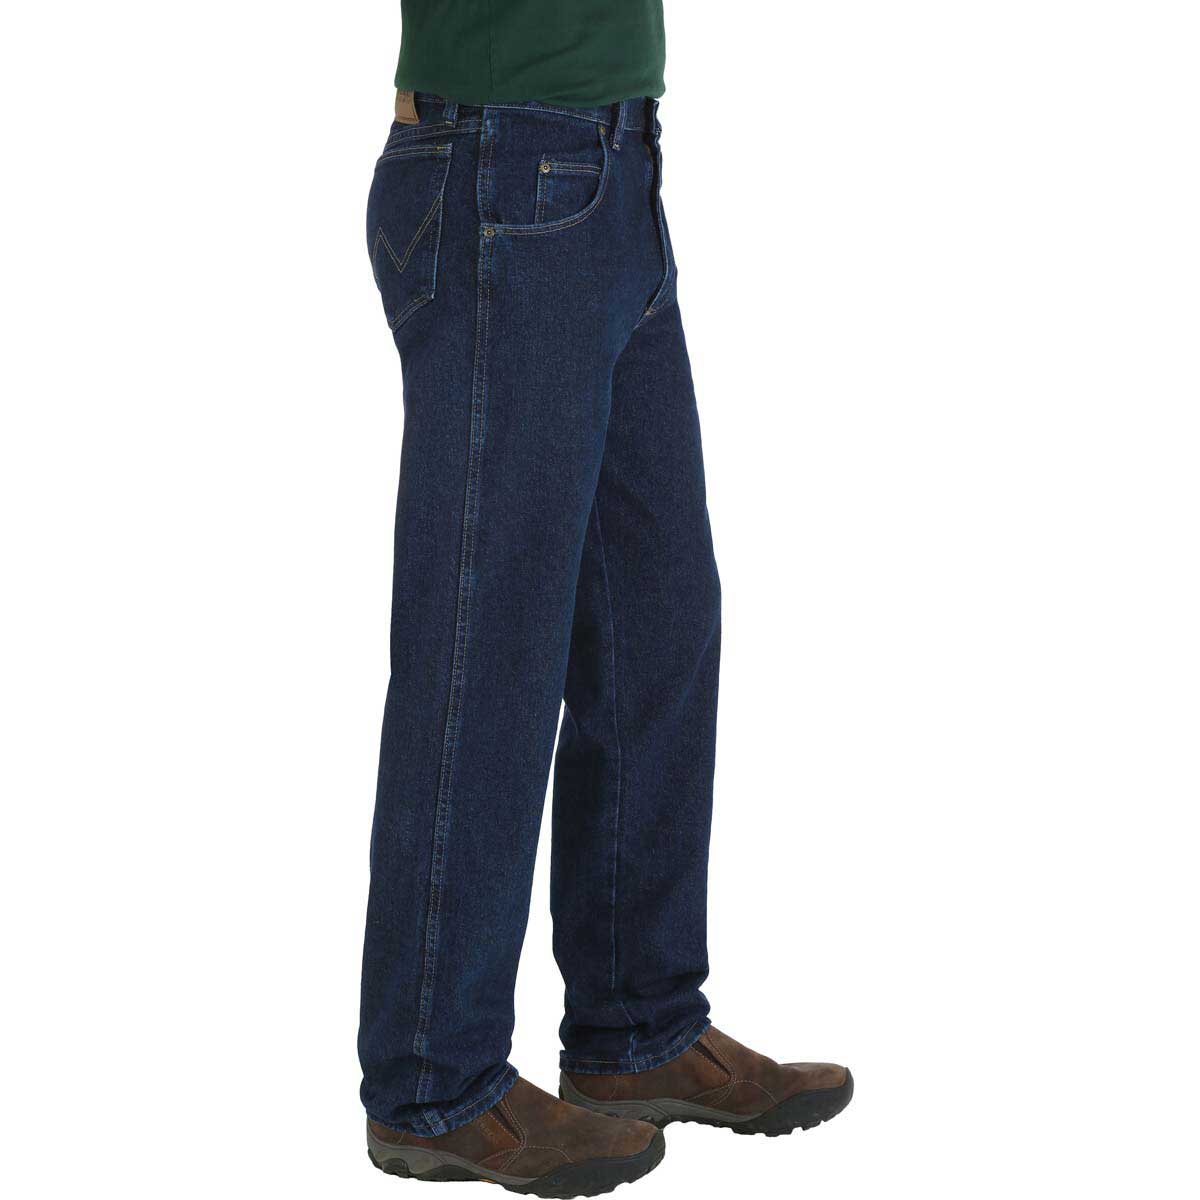 Rugged Wear Relaxed Fit Mens Jeans Wrangler - Mens Clothing